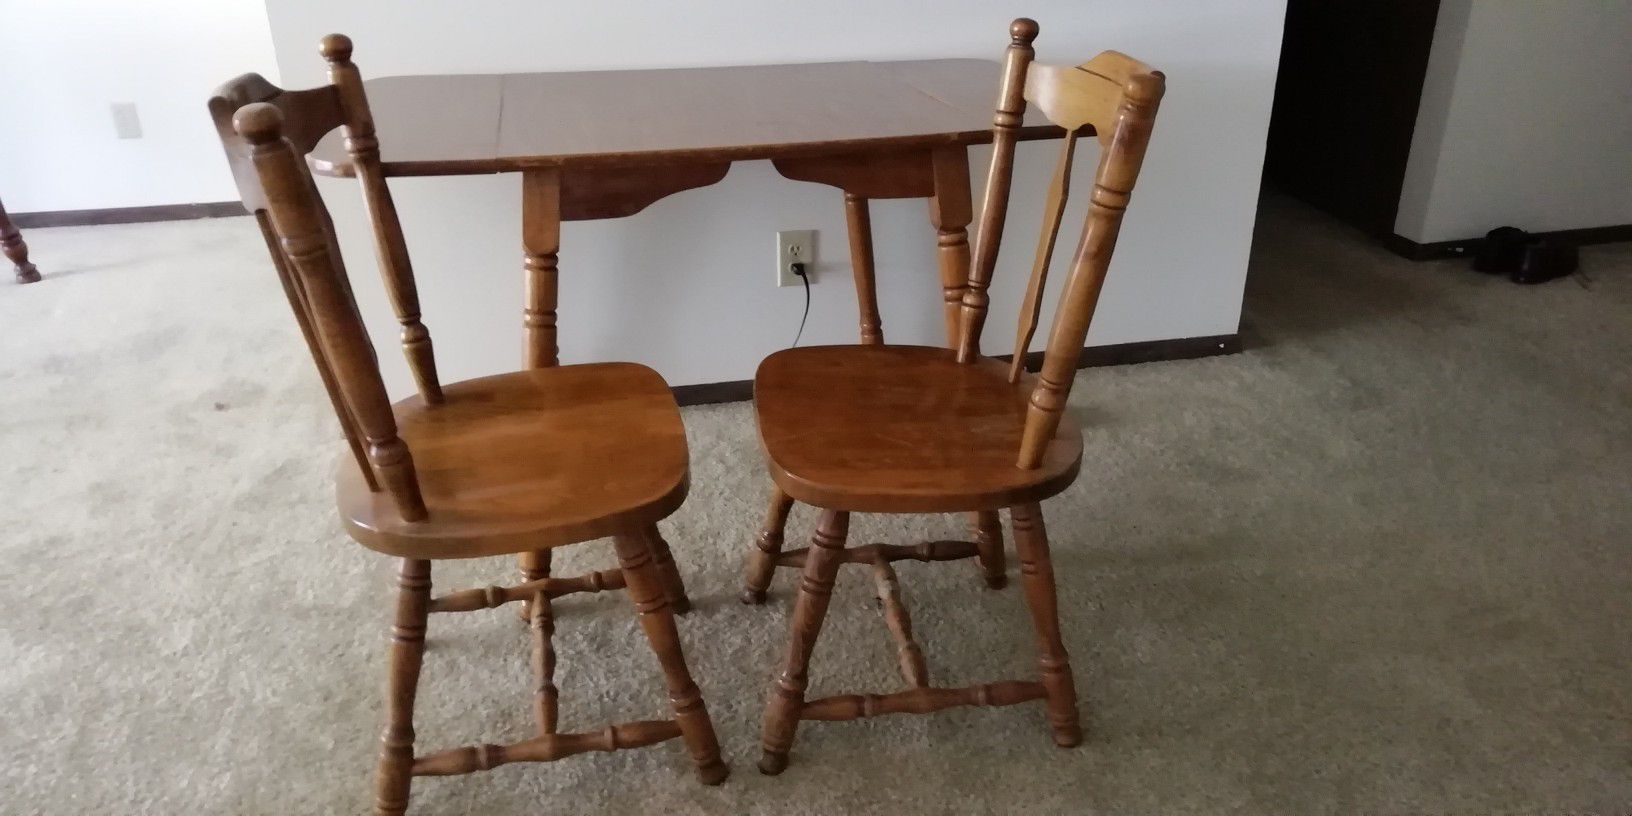 Drop leaf table with 2 chairs.